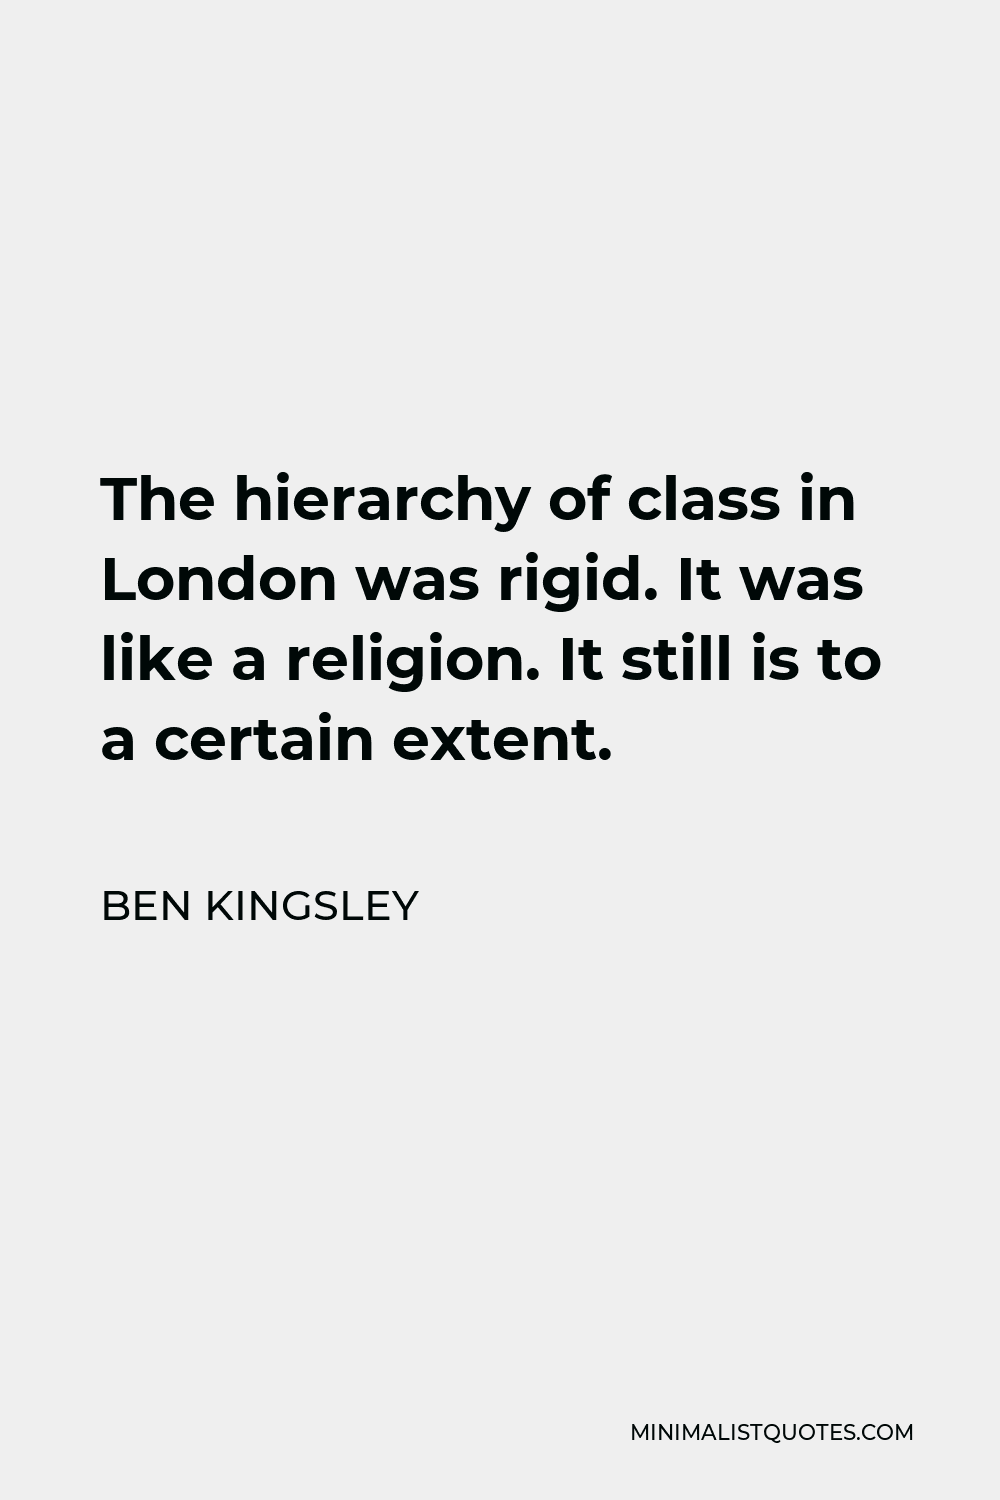 Ben Kingsley Quote - The hierarchy of class in London was rigid. It was like a religion. It still is to a certain extent.